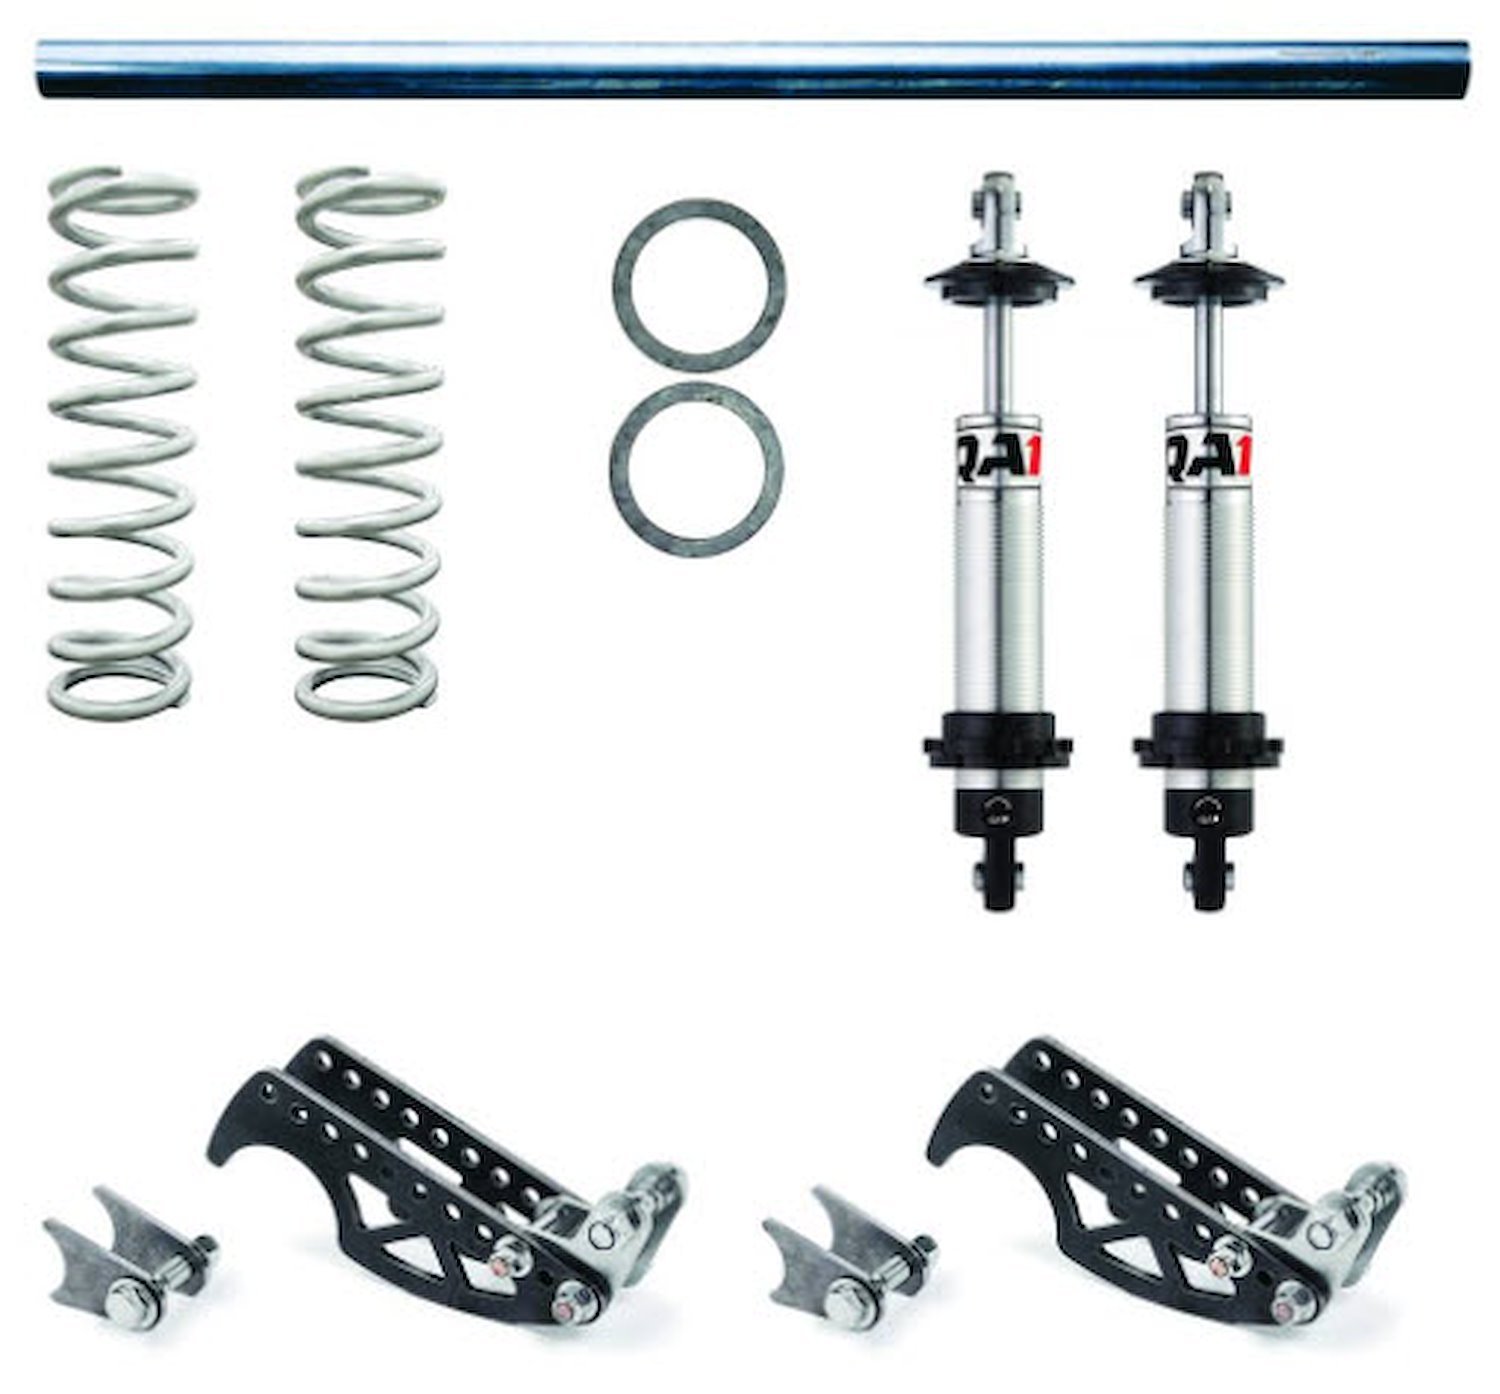 DS501-12250 Heavy-Duty Pro Rear Coil-Over Conversion System for 3 in. Axle Tubes w/Single-Adjustable Shocks & 250 lb. Springs